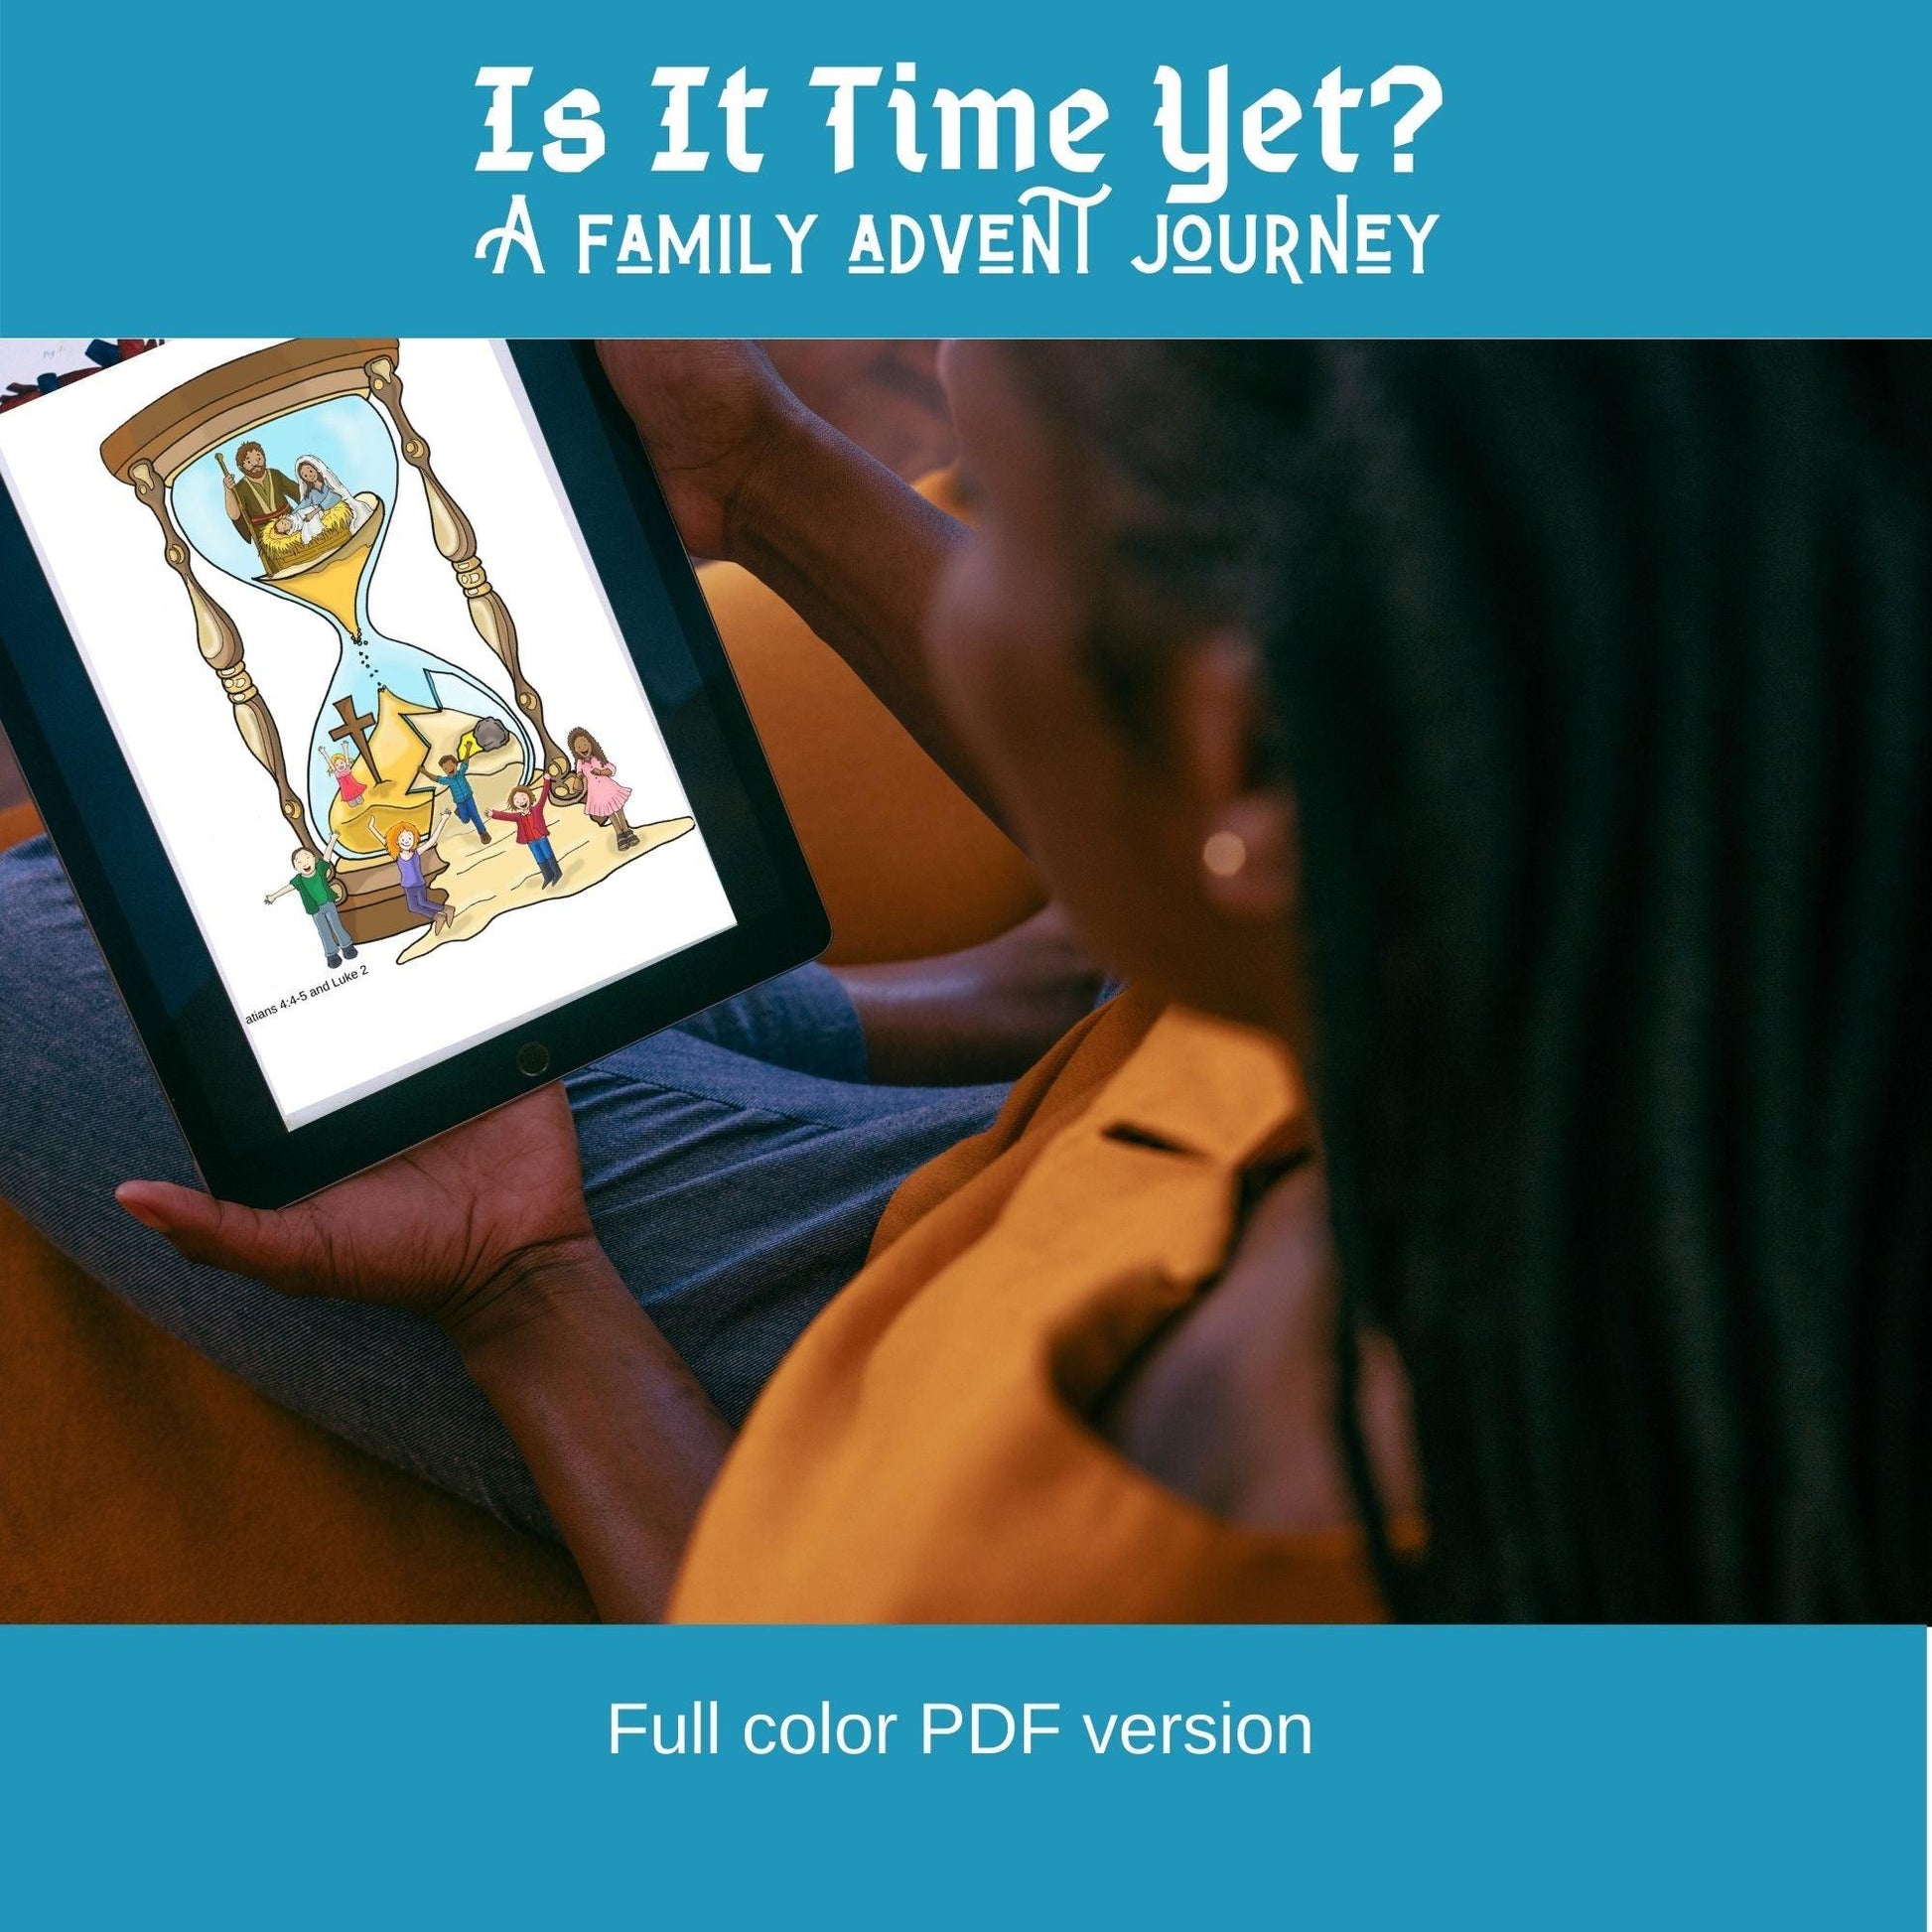 "Is It Time Yet?" EBOOK & Family Worship Guide for Advent  (download only) - Sunday School Store 